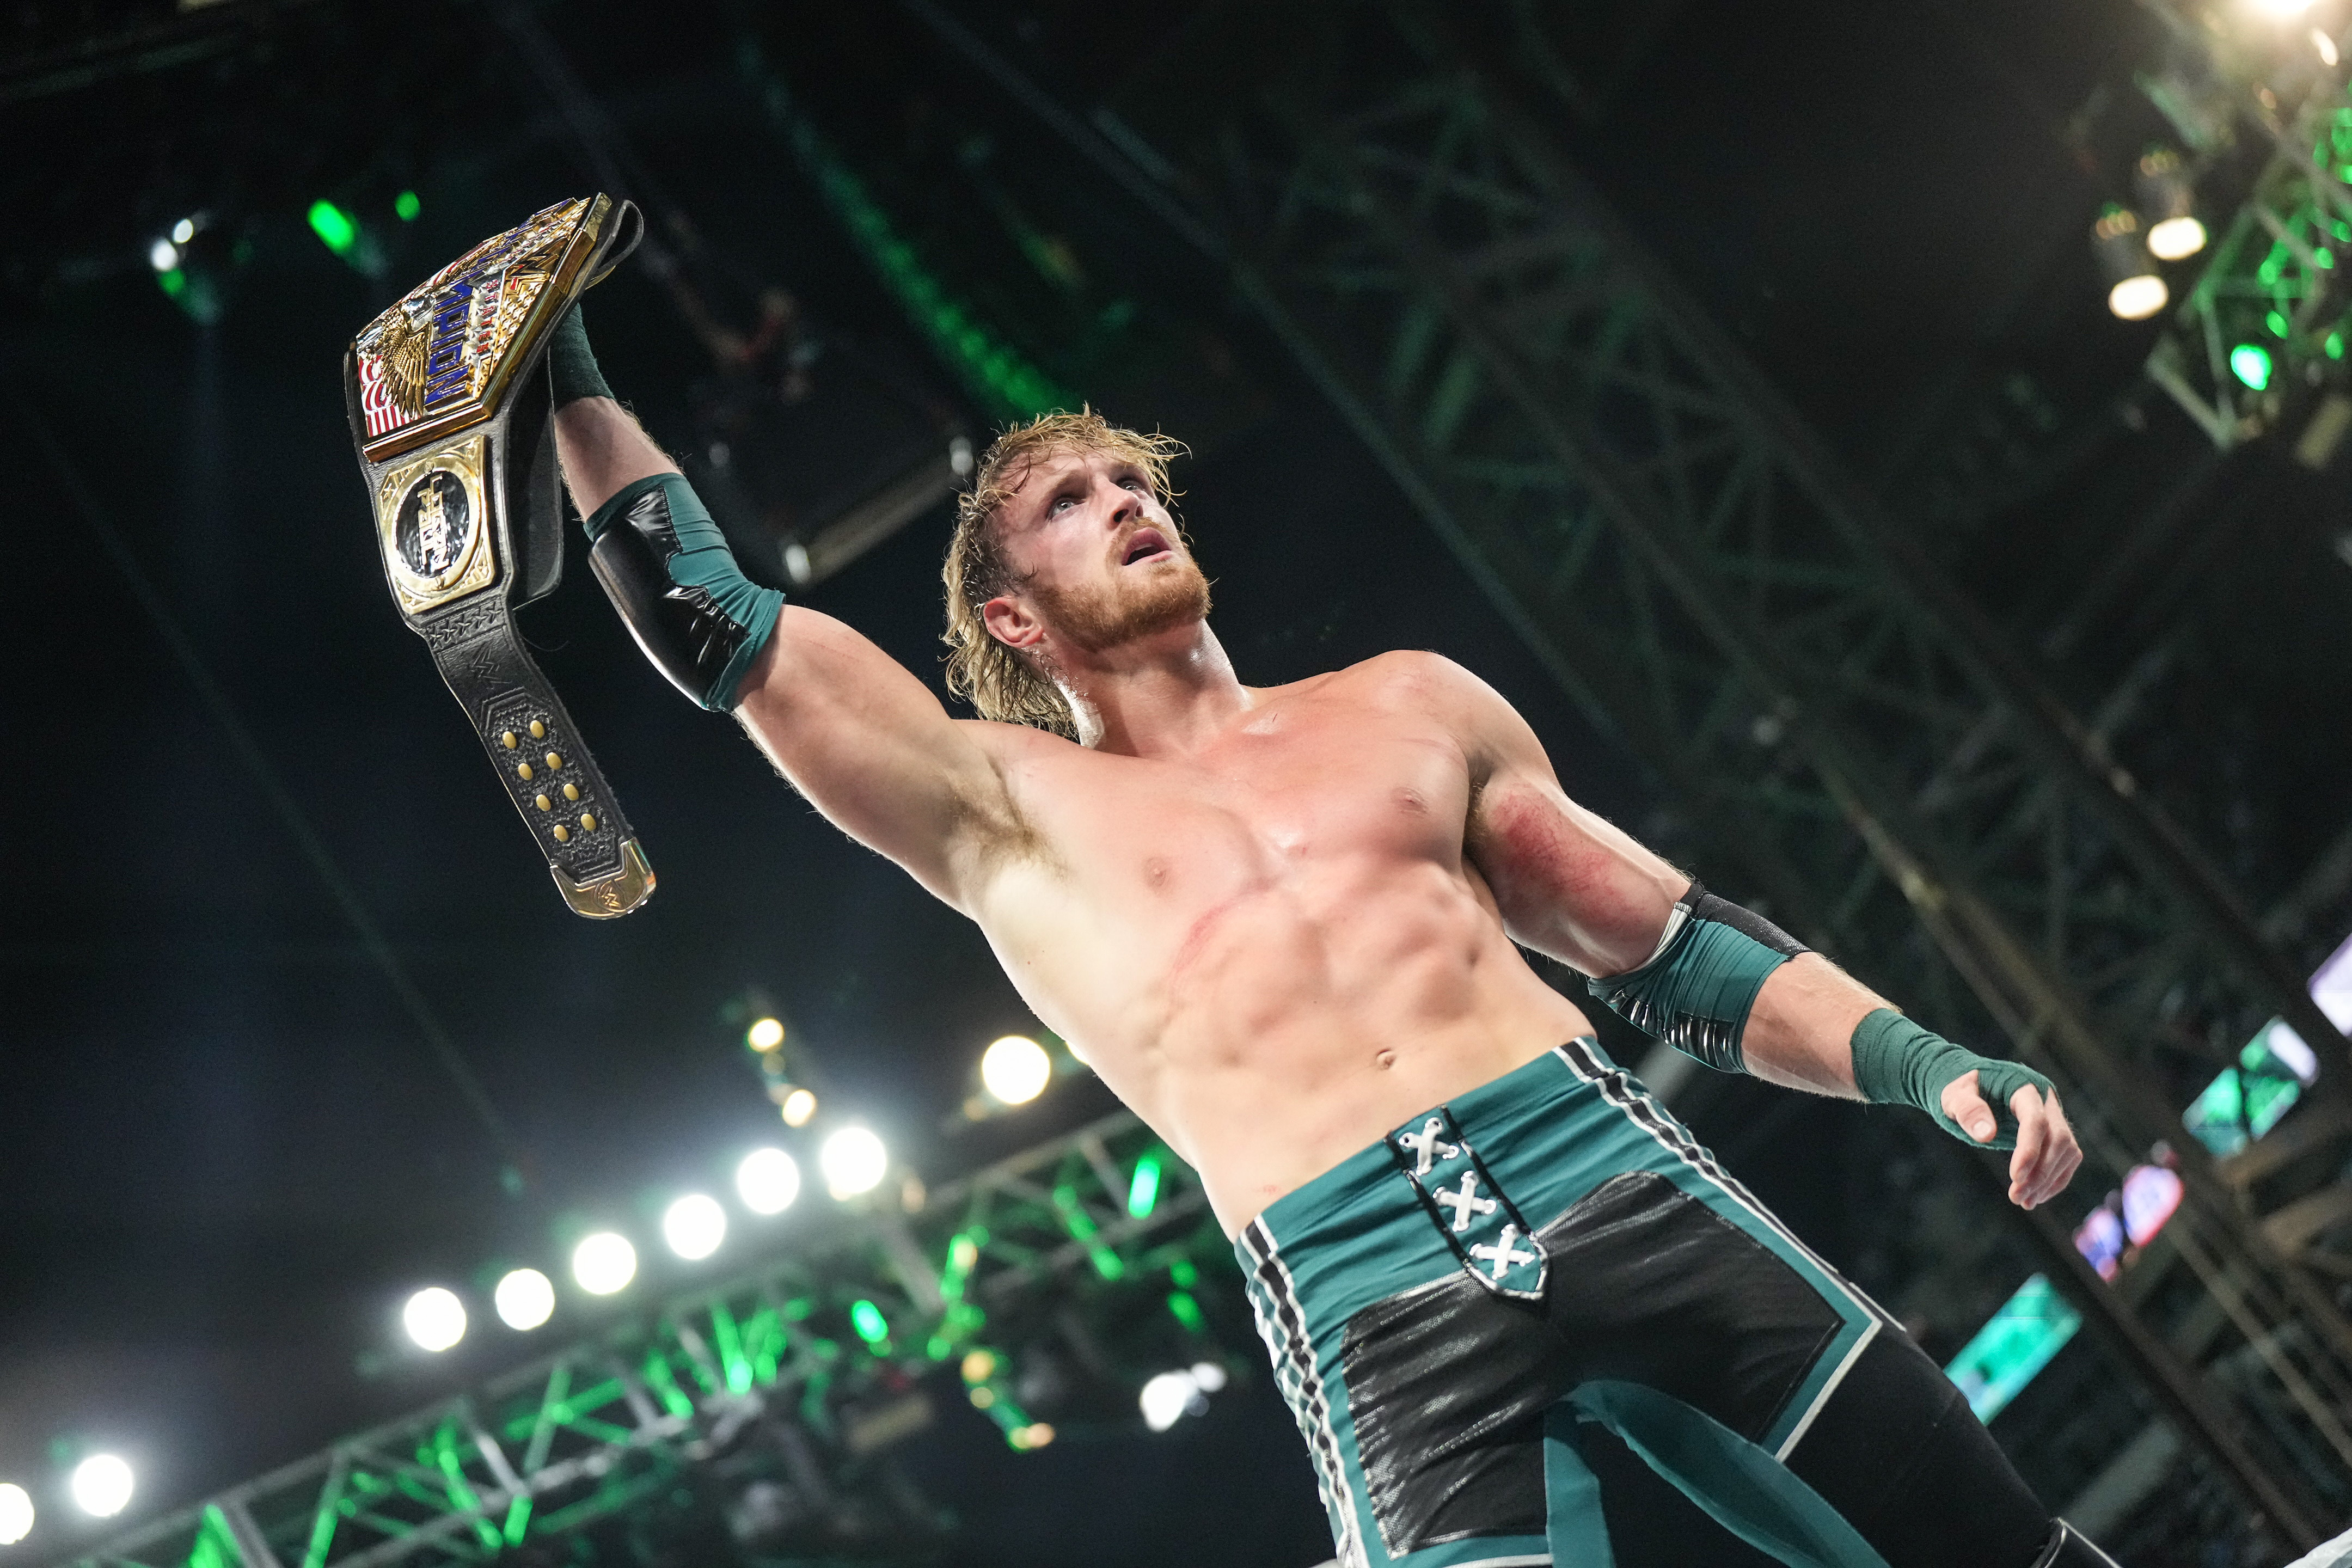 Logan Paul retained his United States Championship title